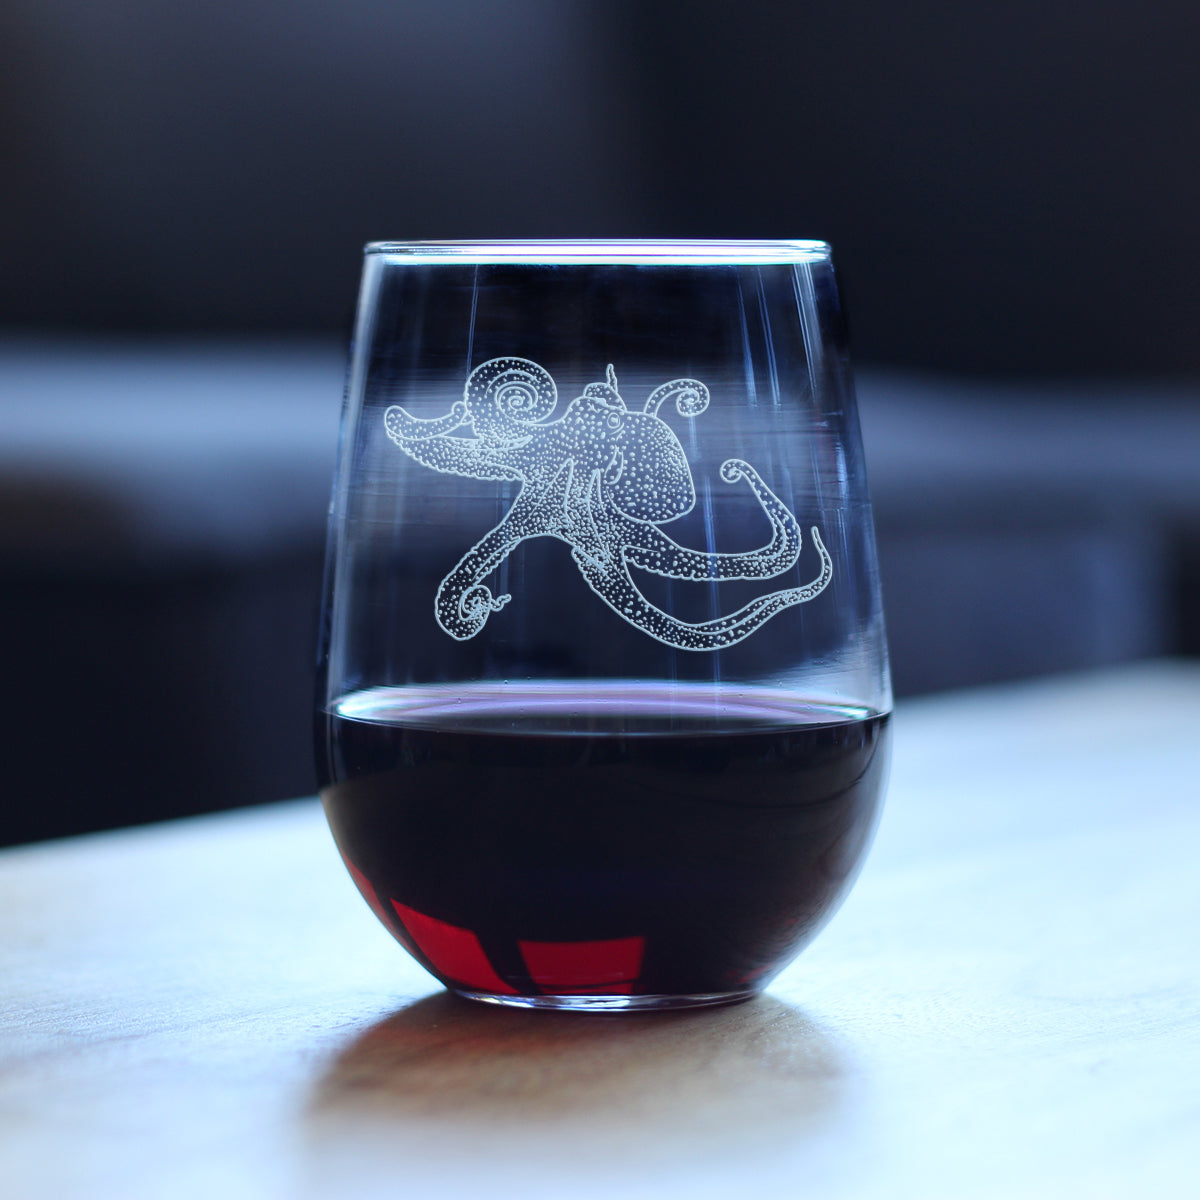 Octopus Engraved Stemless Wine Glass, Unique Decorative Gifts for Beach House, Cute Birthday Gift for Women Who Love Octopuses